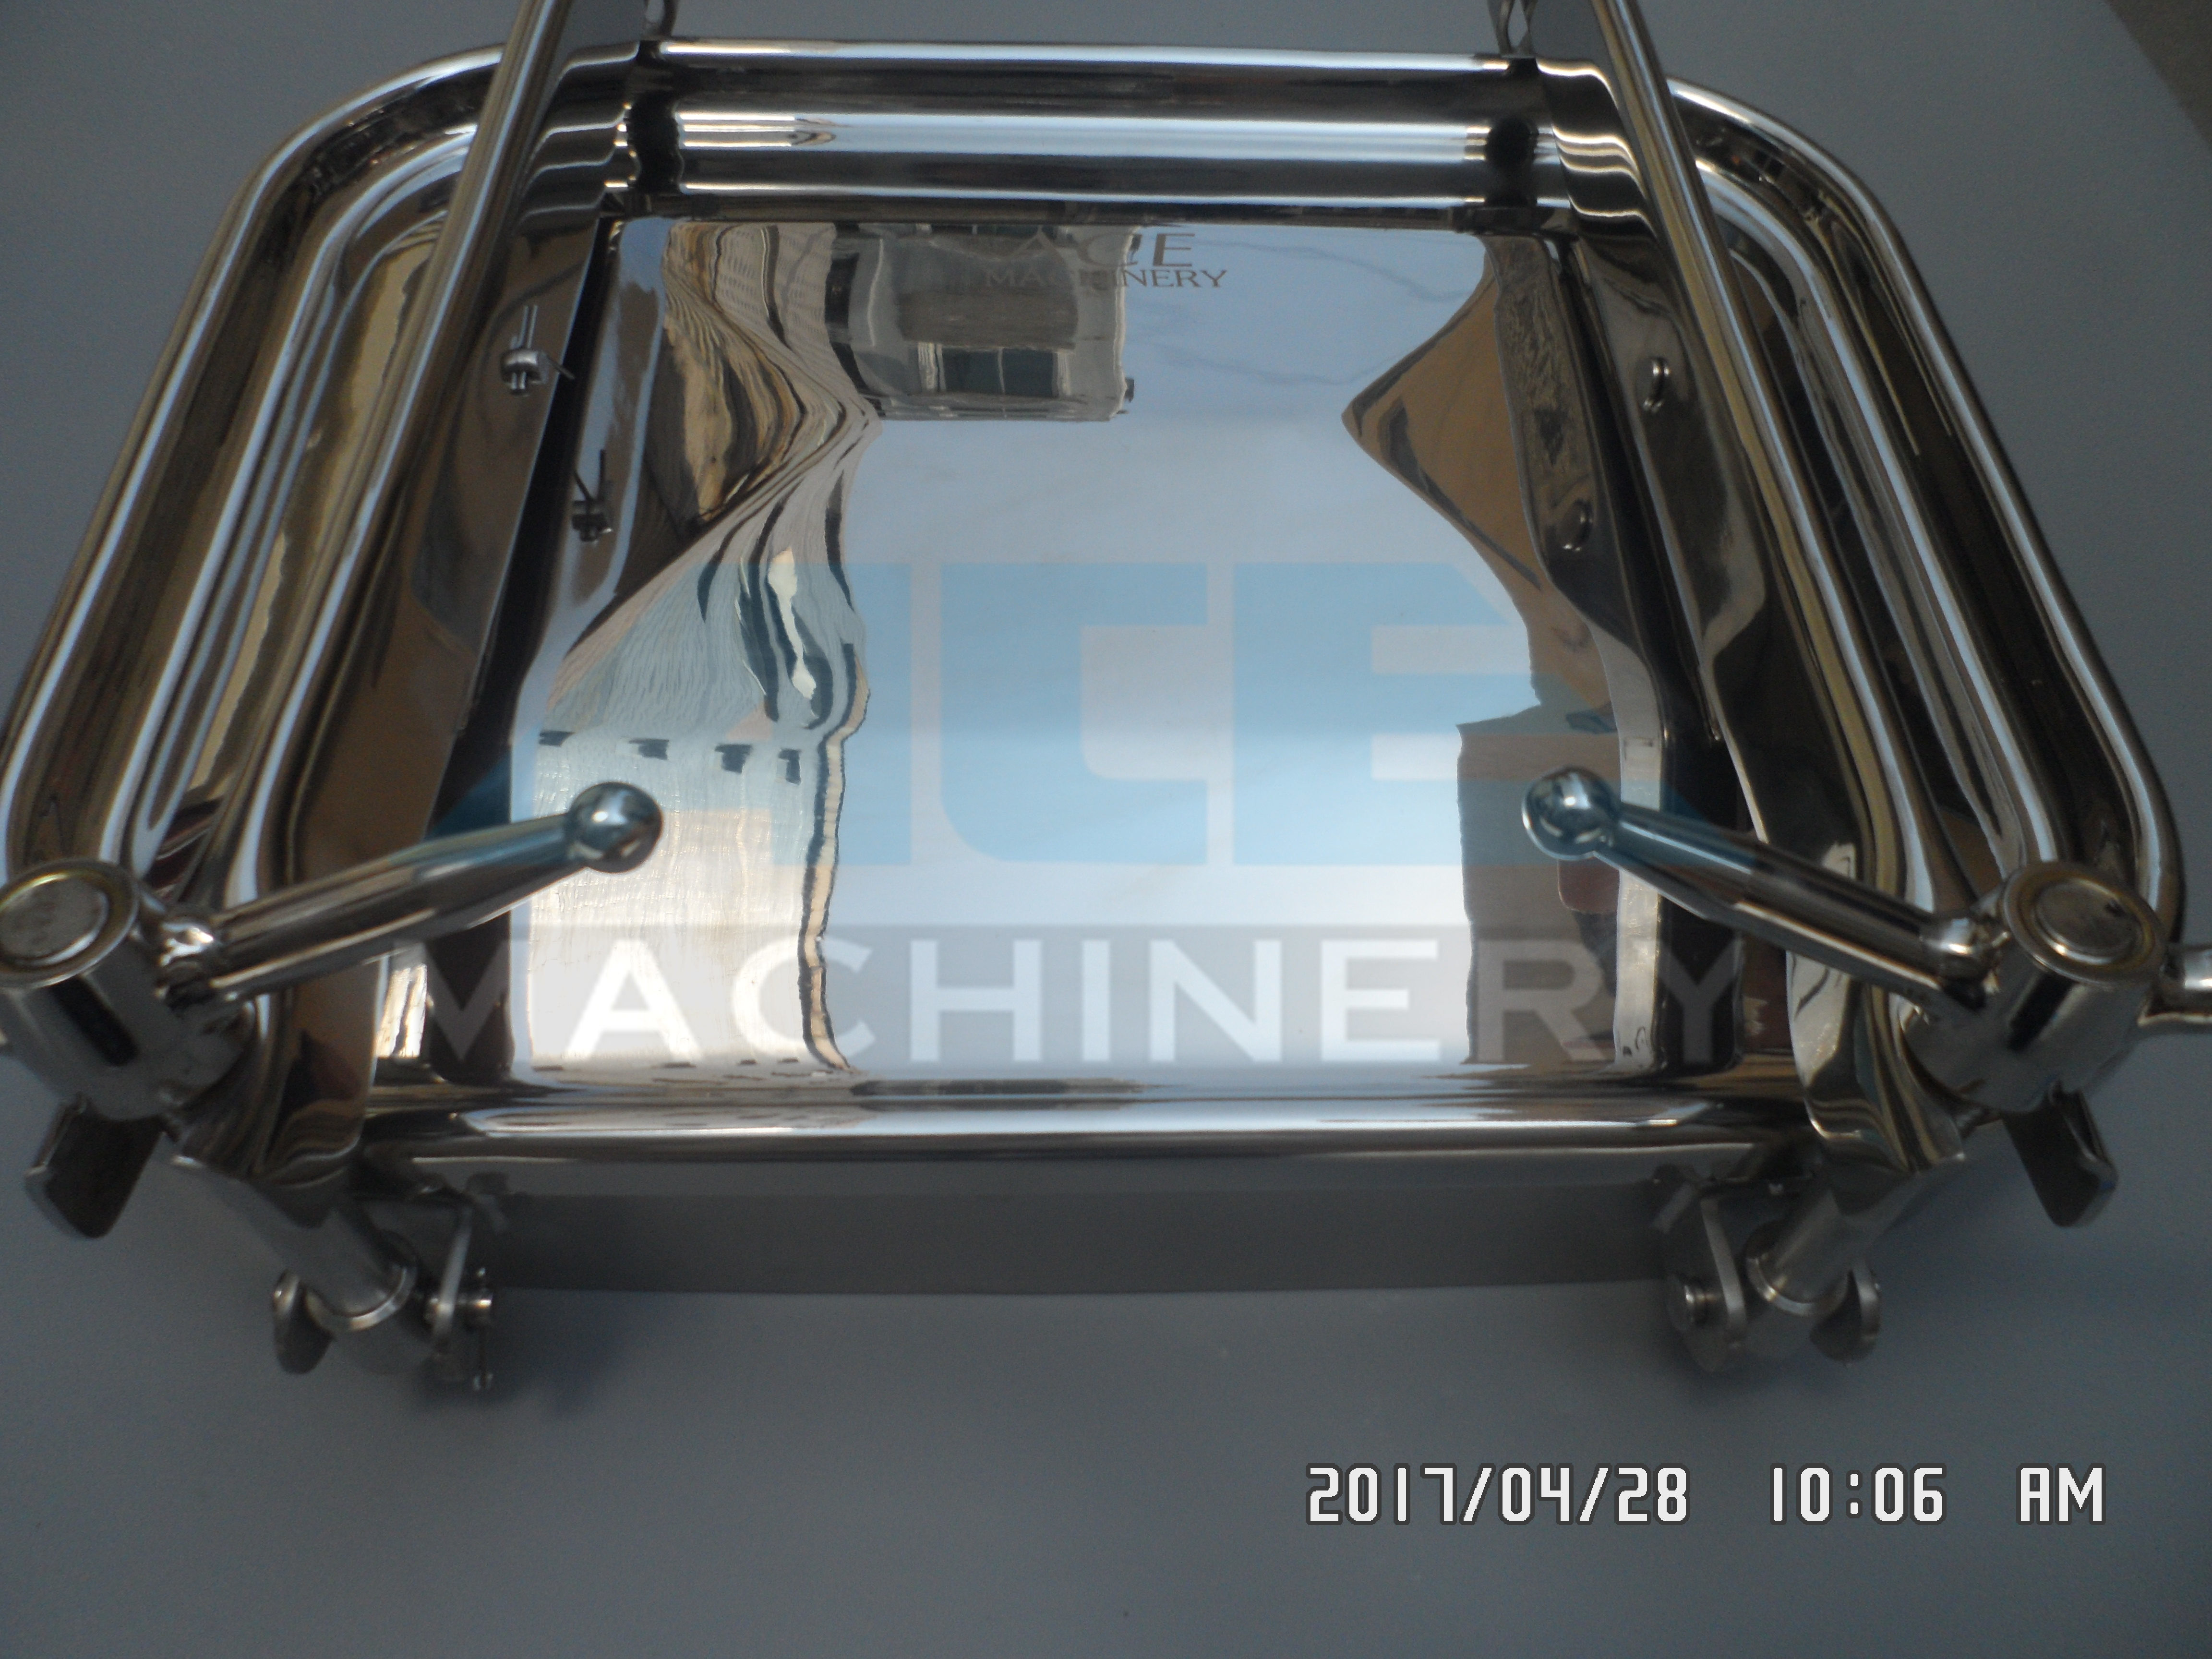  Sanitary Manway Covers /Stainless Steel Tank Manway Cover Manlid (ACE-RK-H1) Manufactures